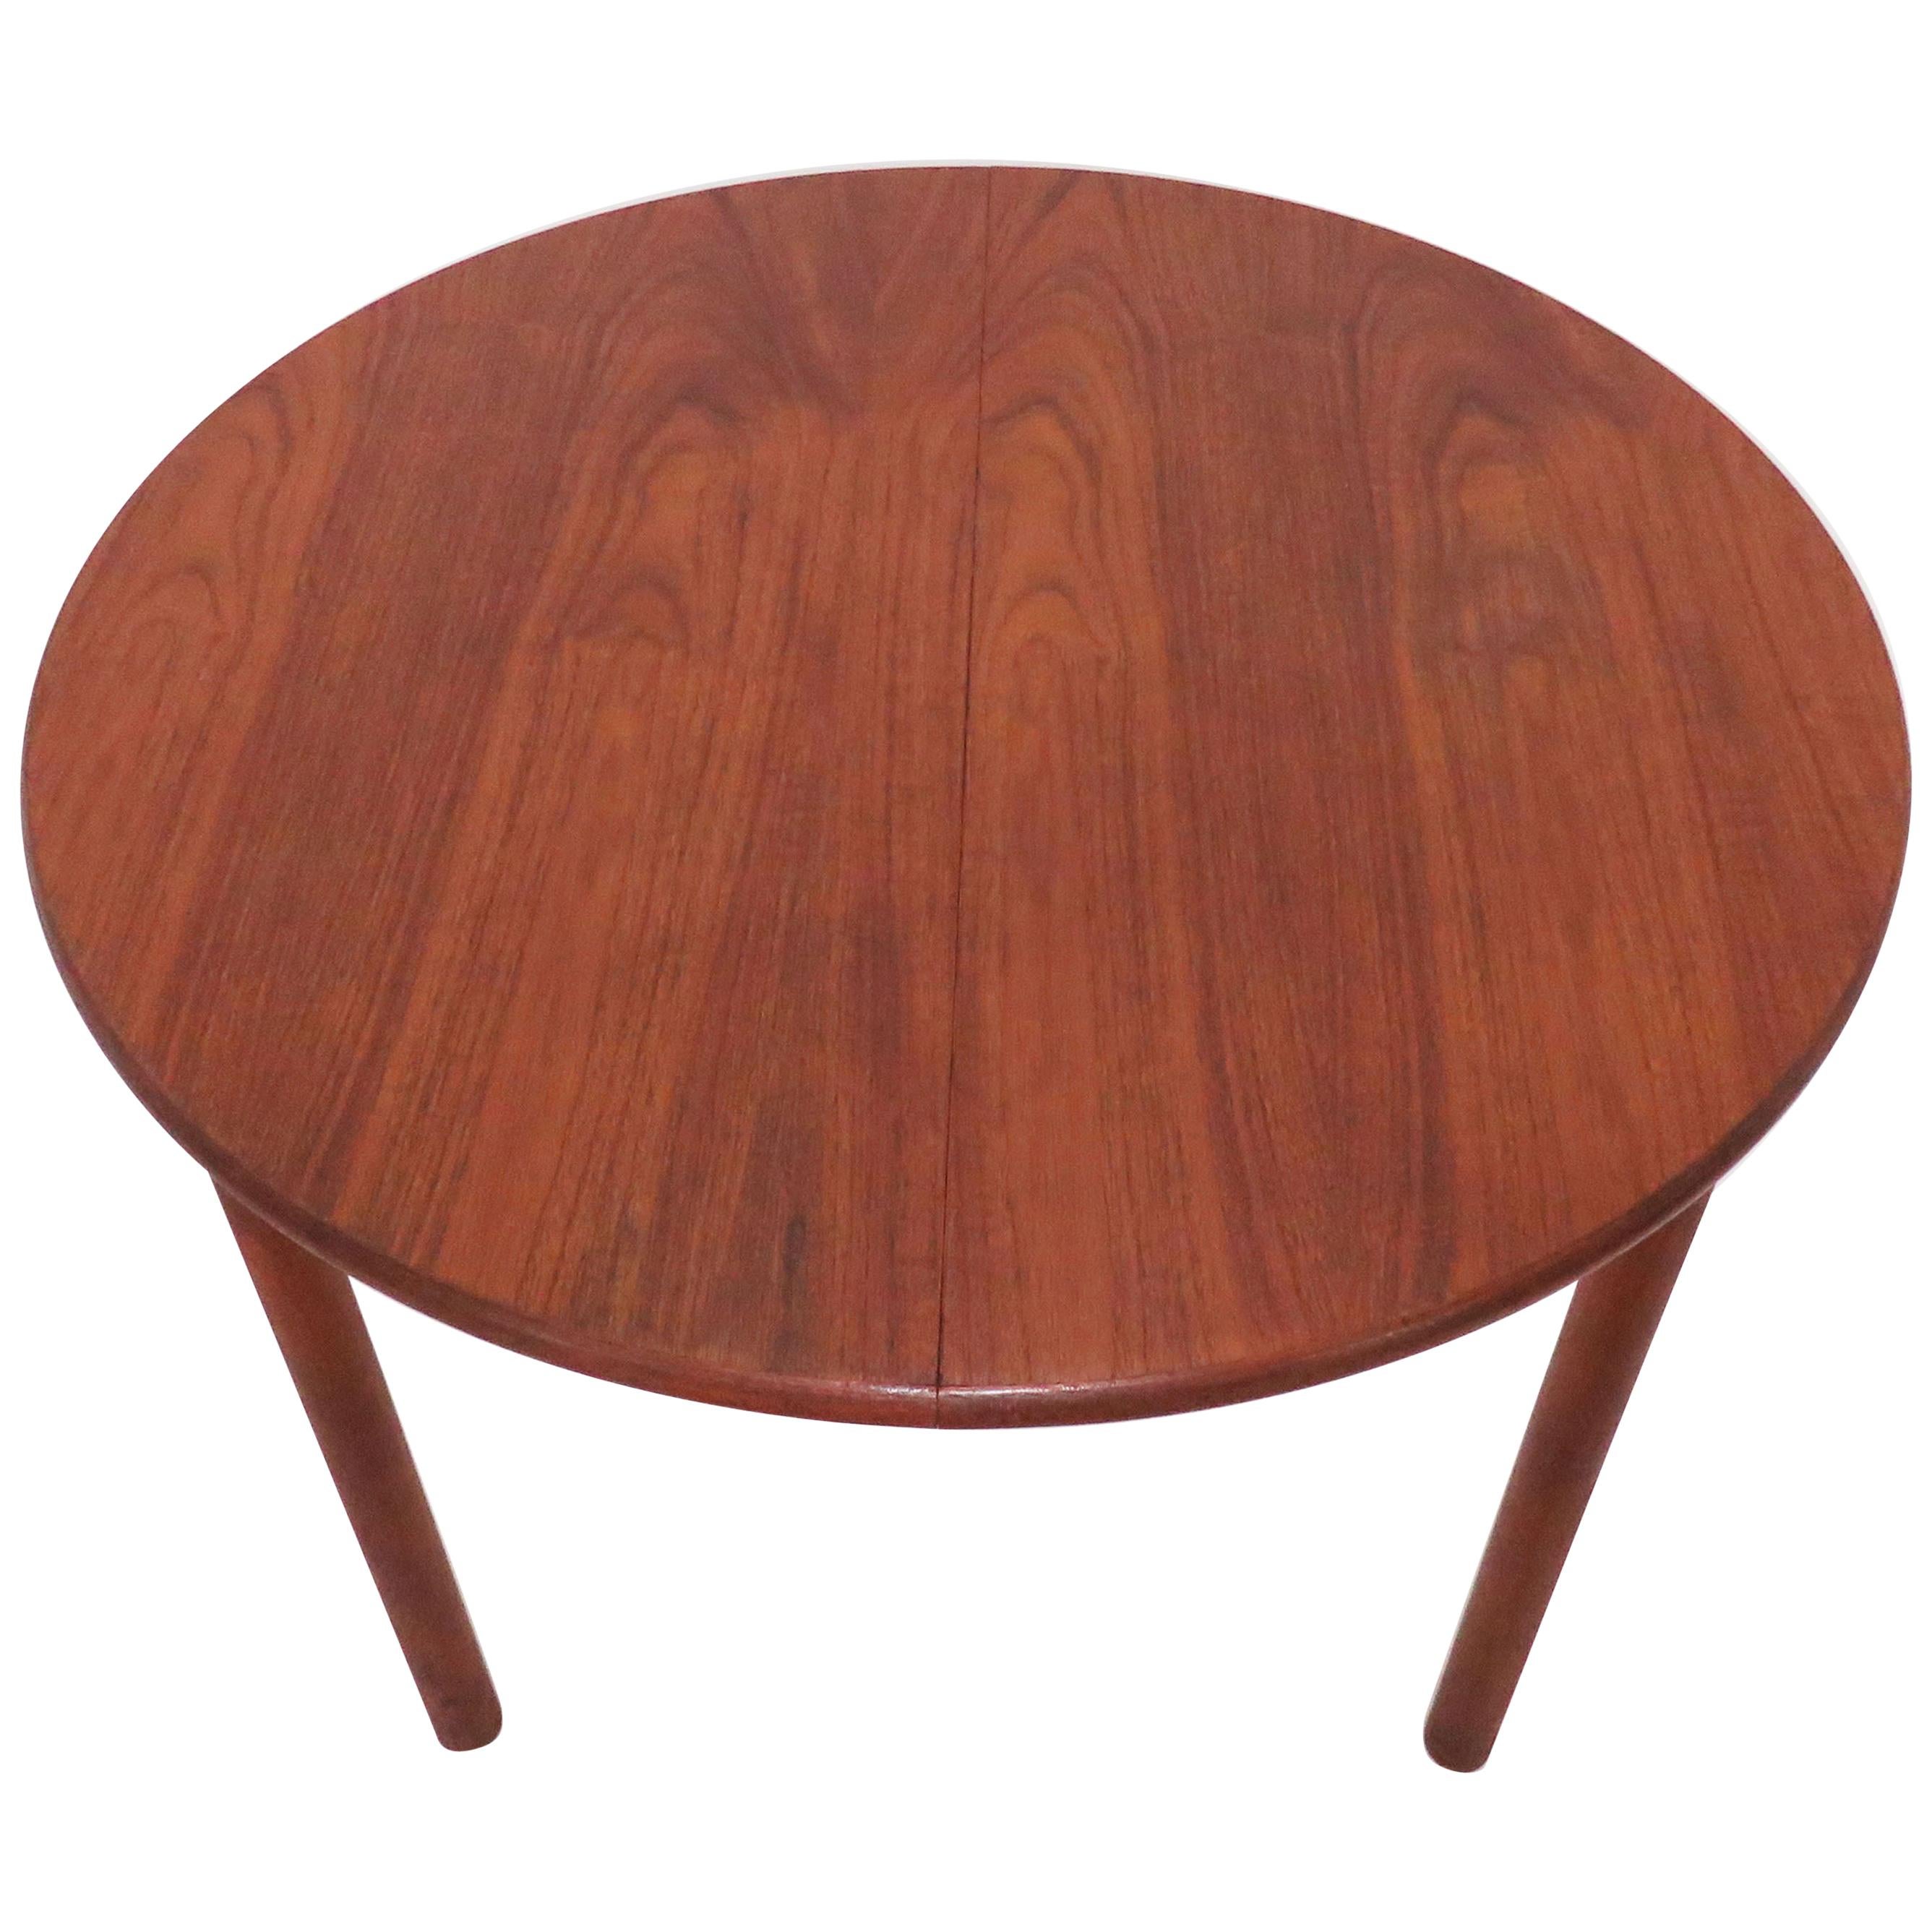 Kofod-Larsen Danish Teak and Padouk Dining Table with Butterfly Leaf